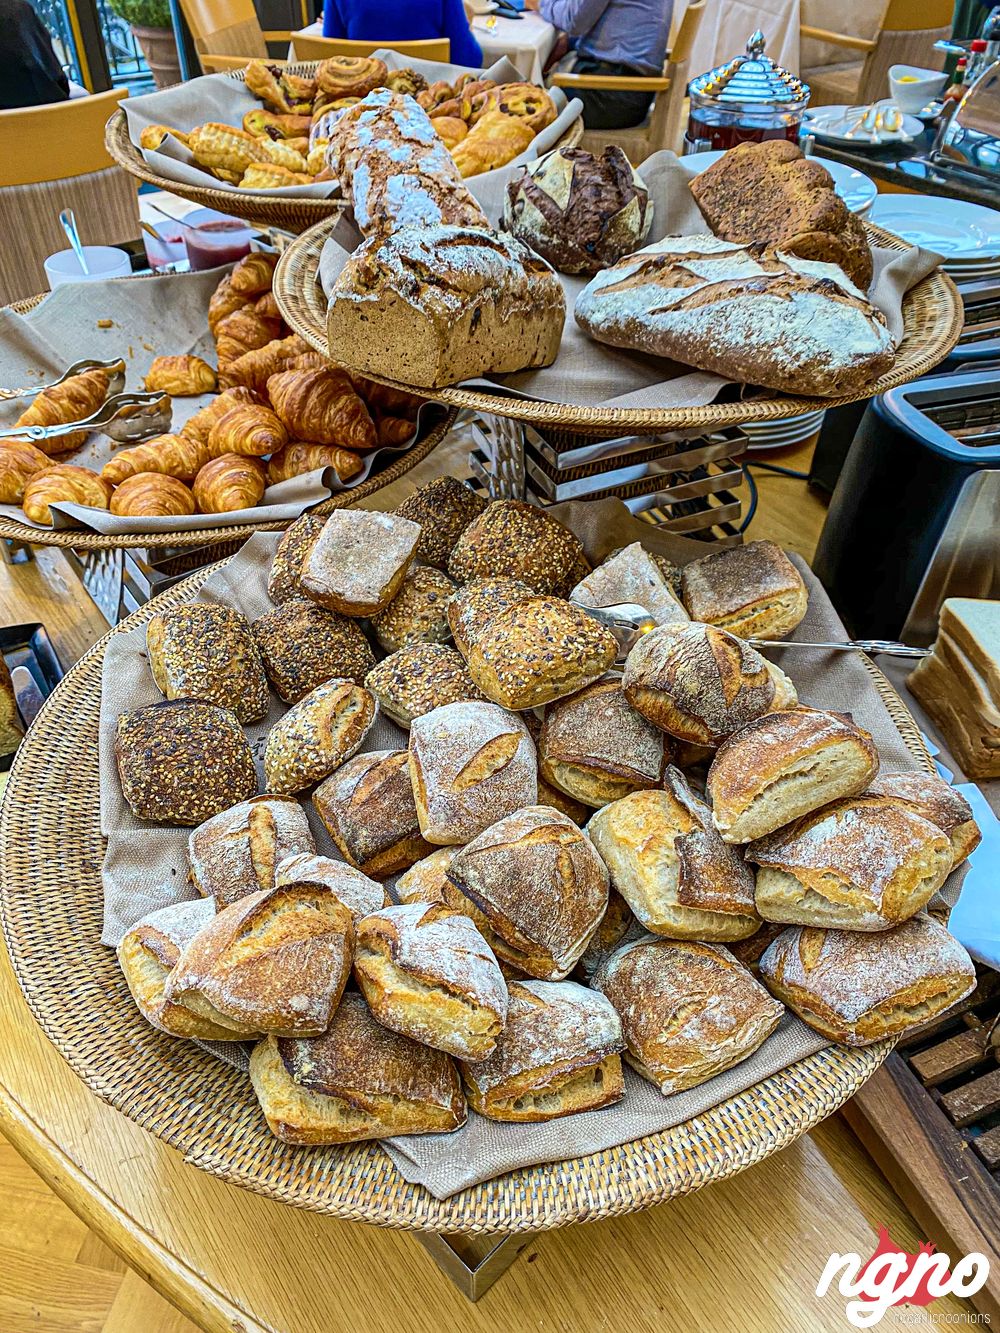 montreux-palace-fairmont-hotel-breakfast-nogarlicnoonions-632019-11-22-02-42-52